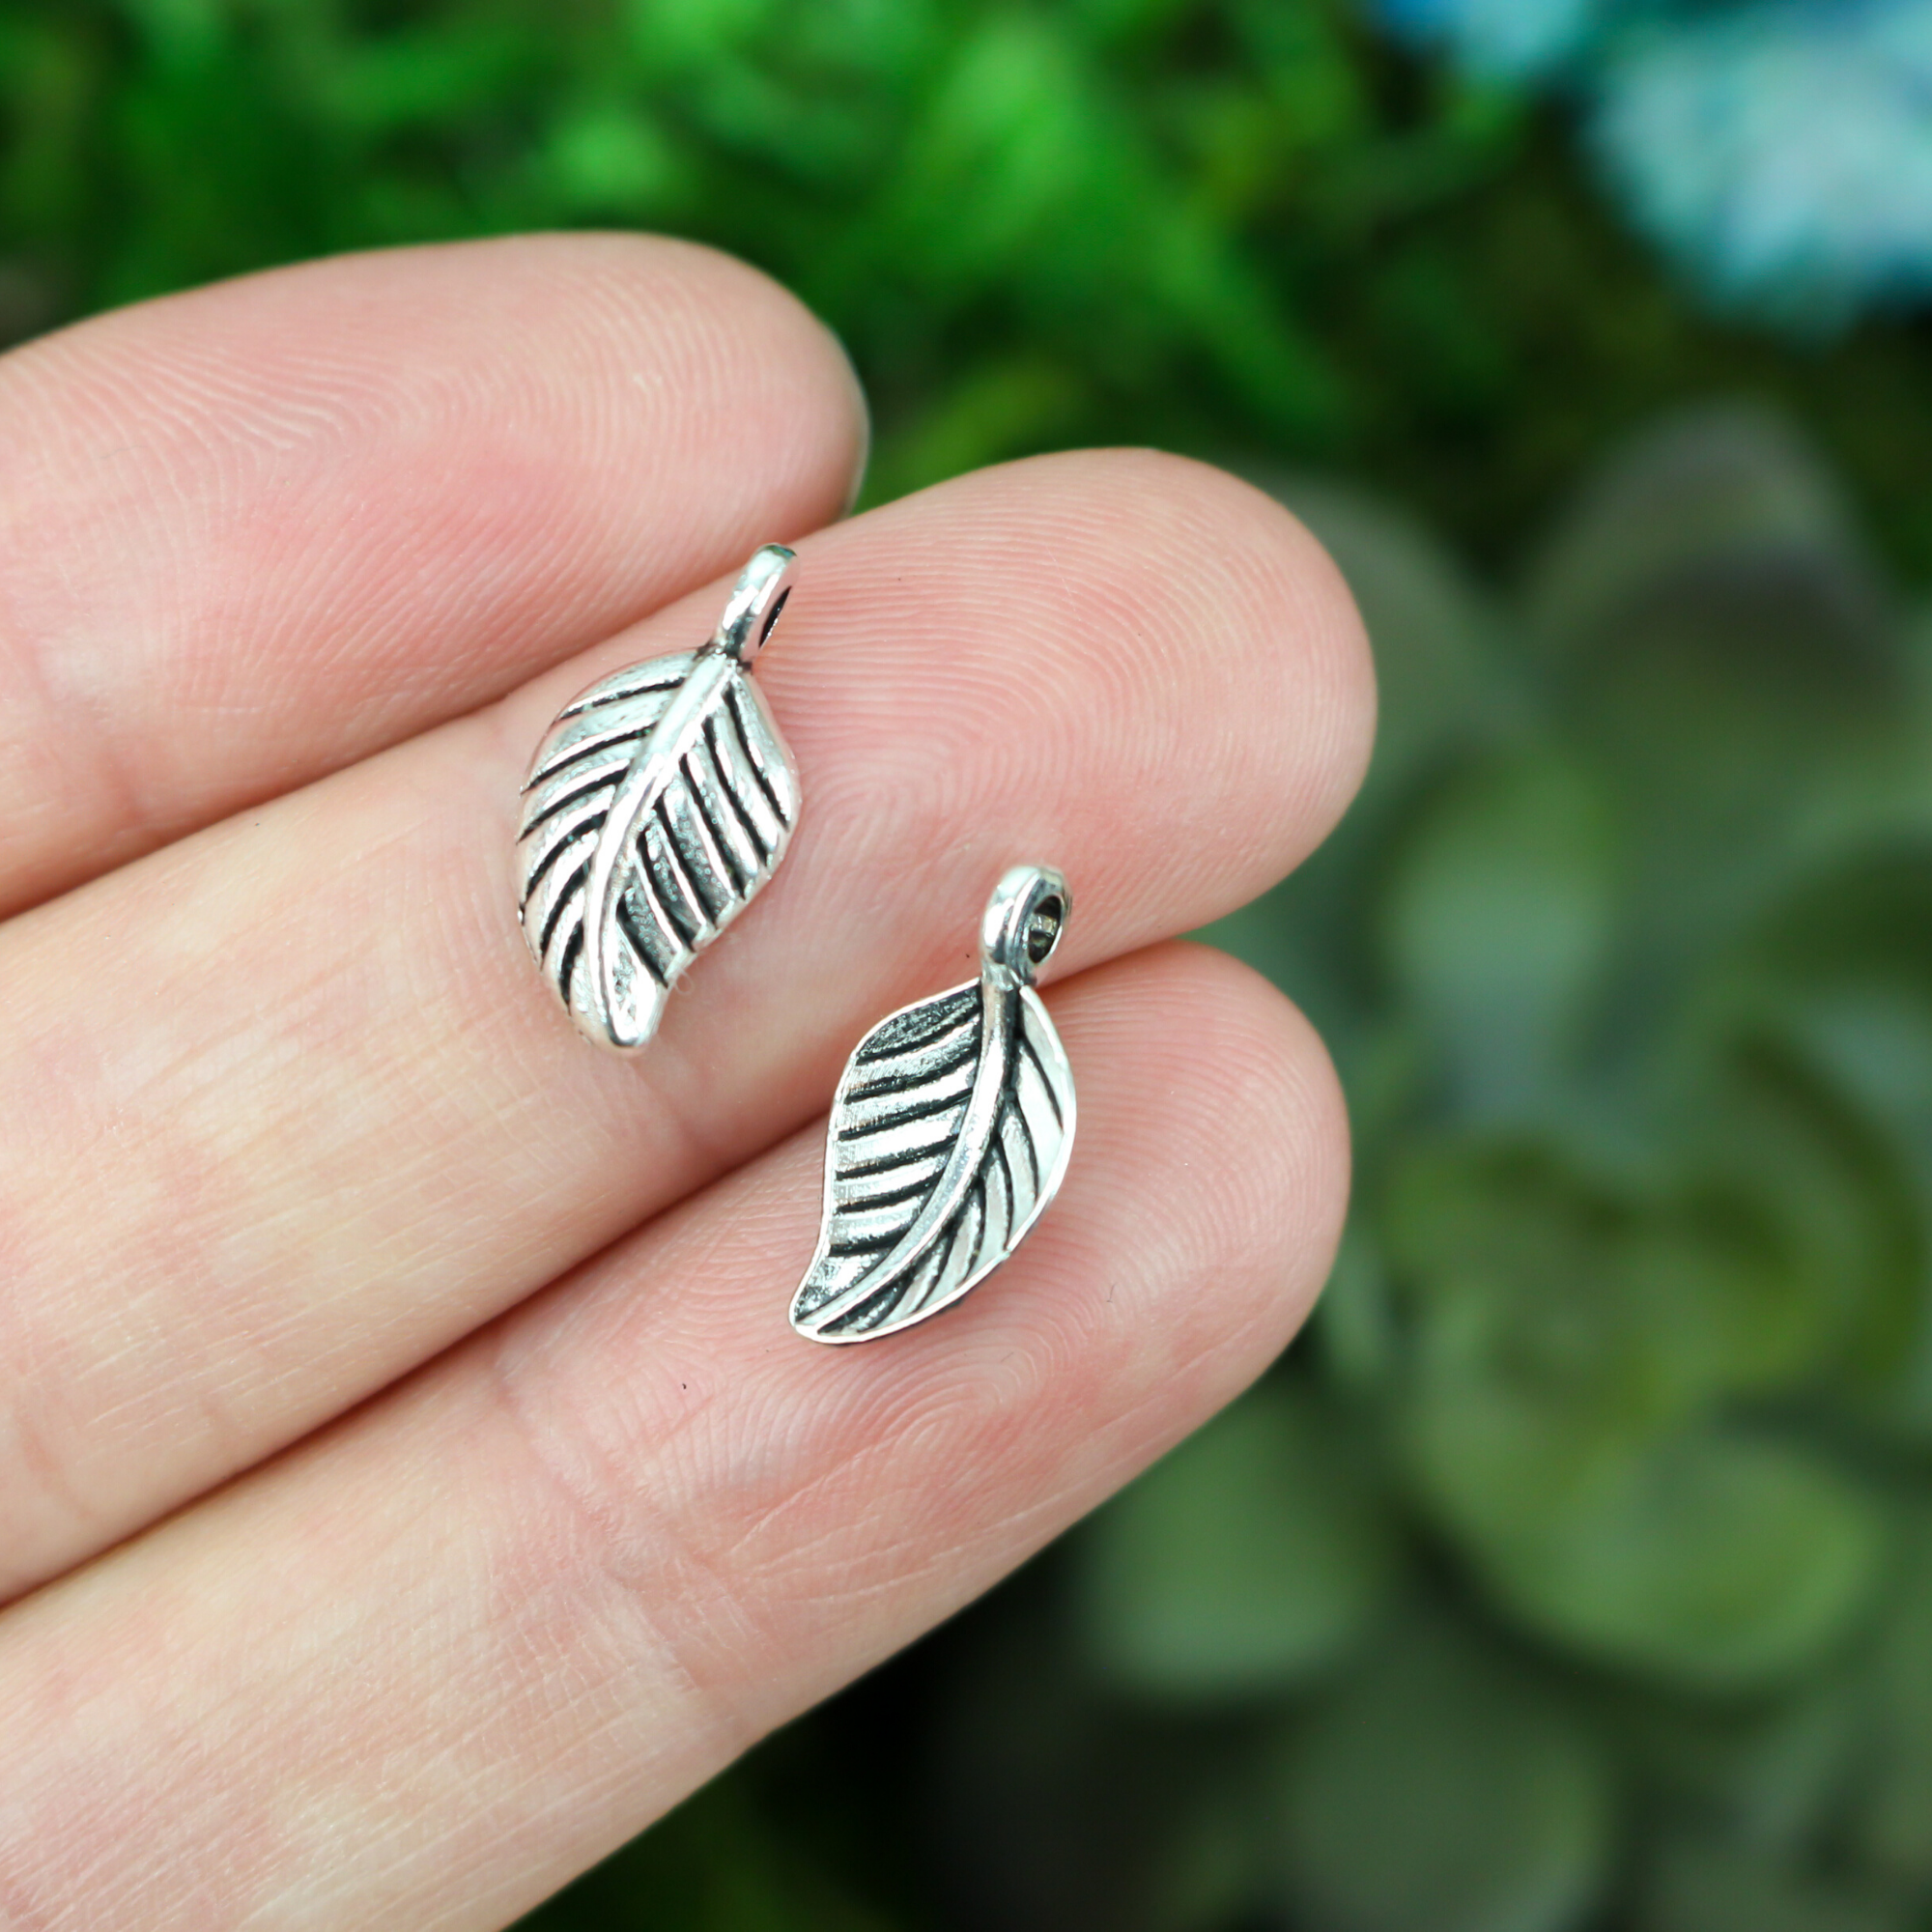 Leaf Charms Silver Tone Color - Symbol of Nature, Growth, Rebirth 25pcs